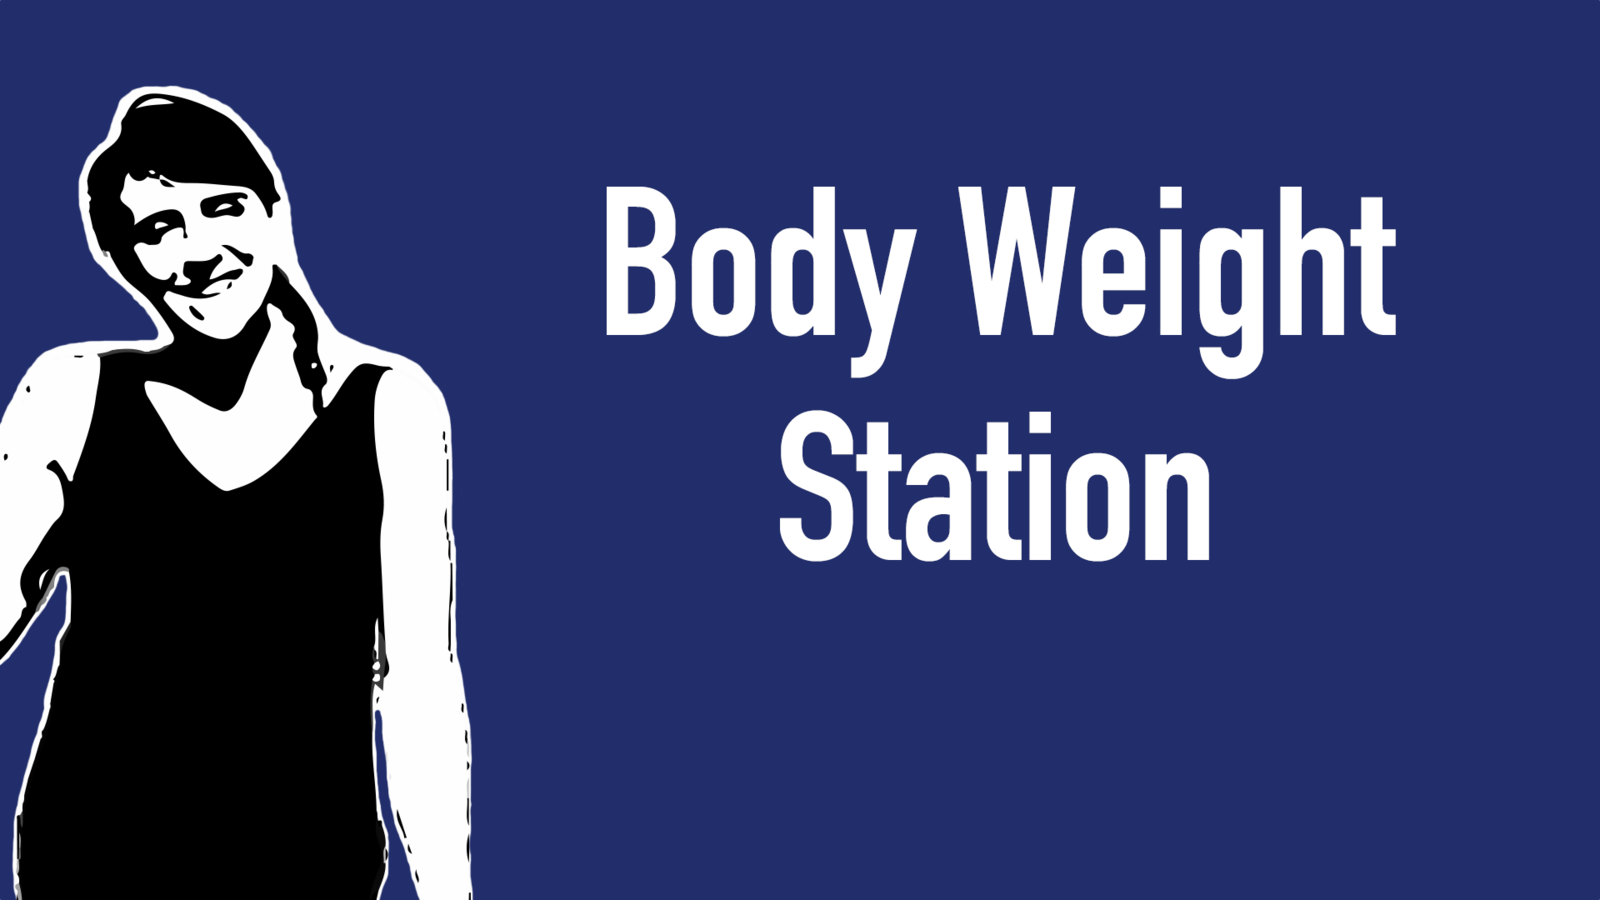 Body Weight Station